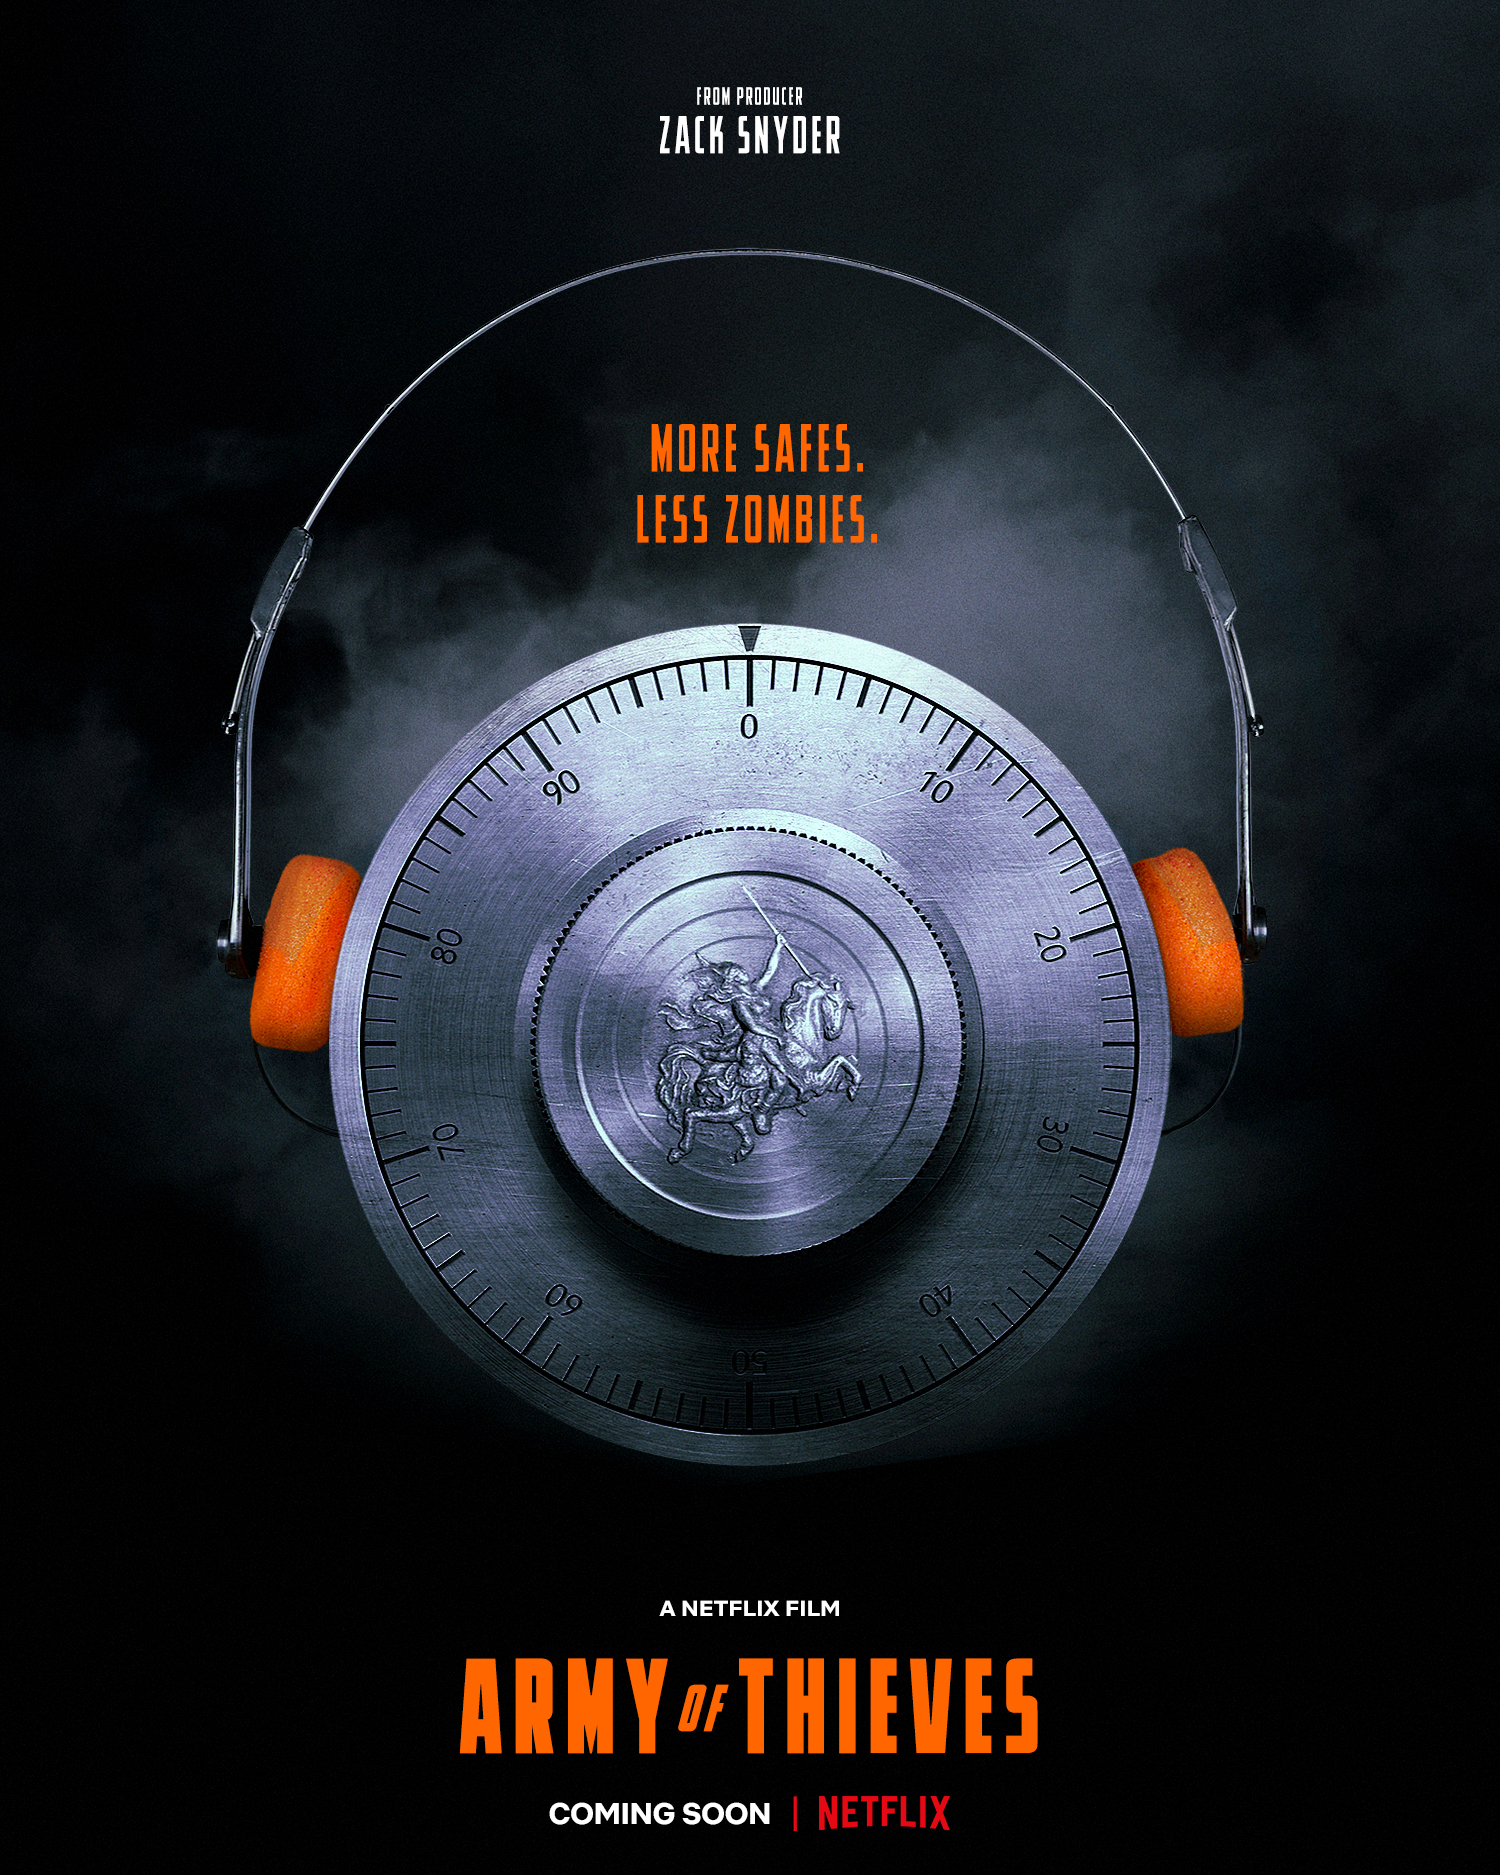 Army of Thieves (2021) Poster - More safes. Less zombies.